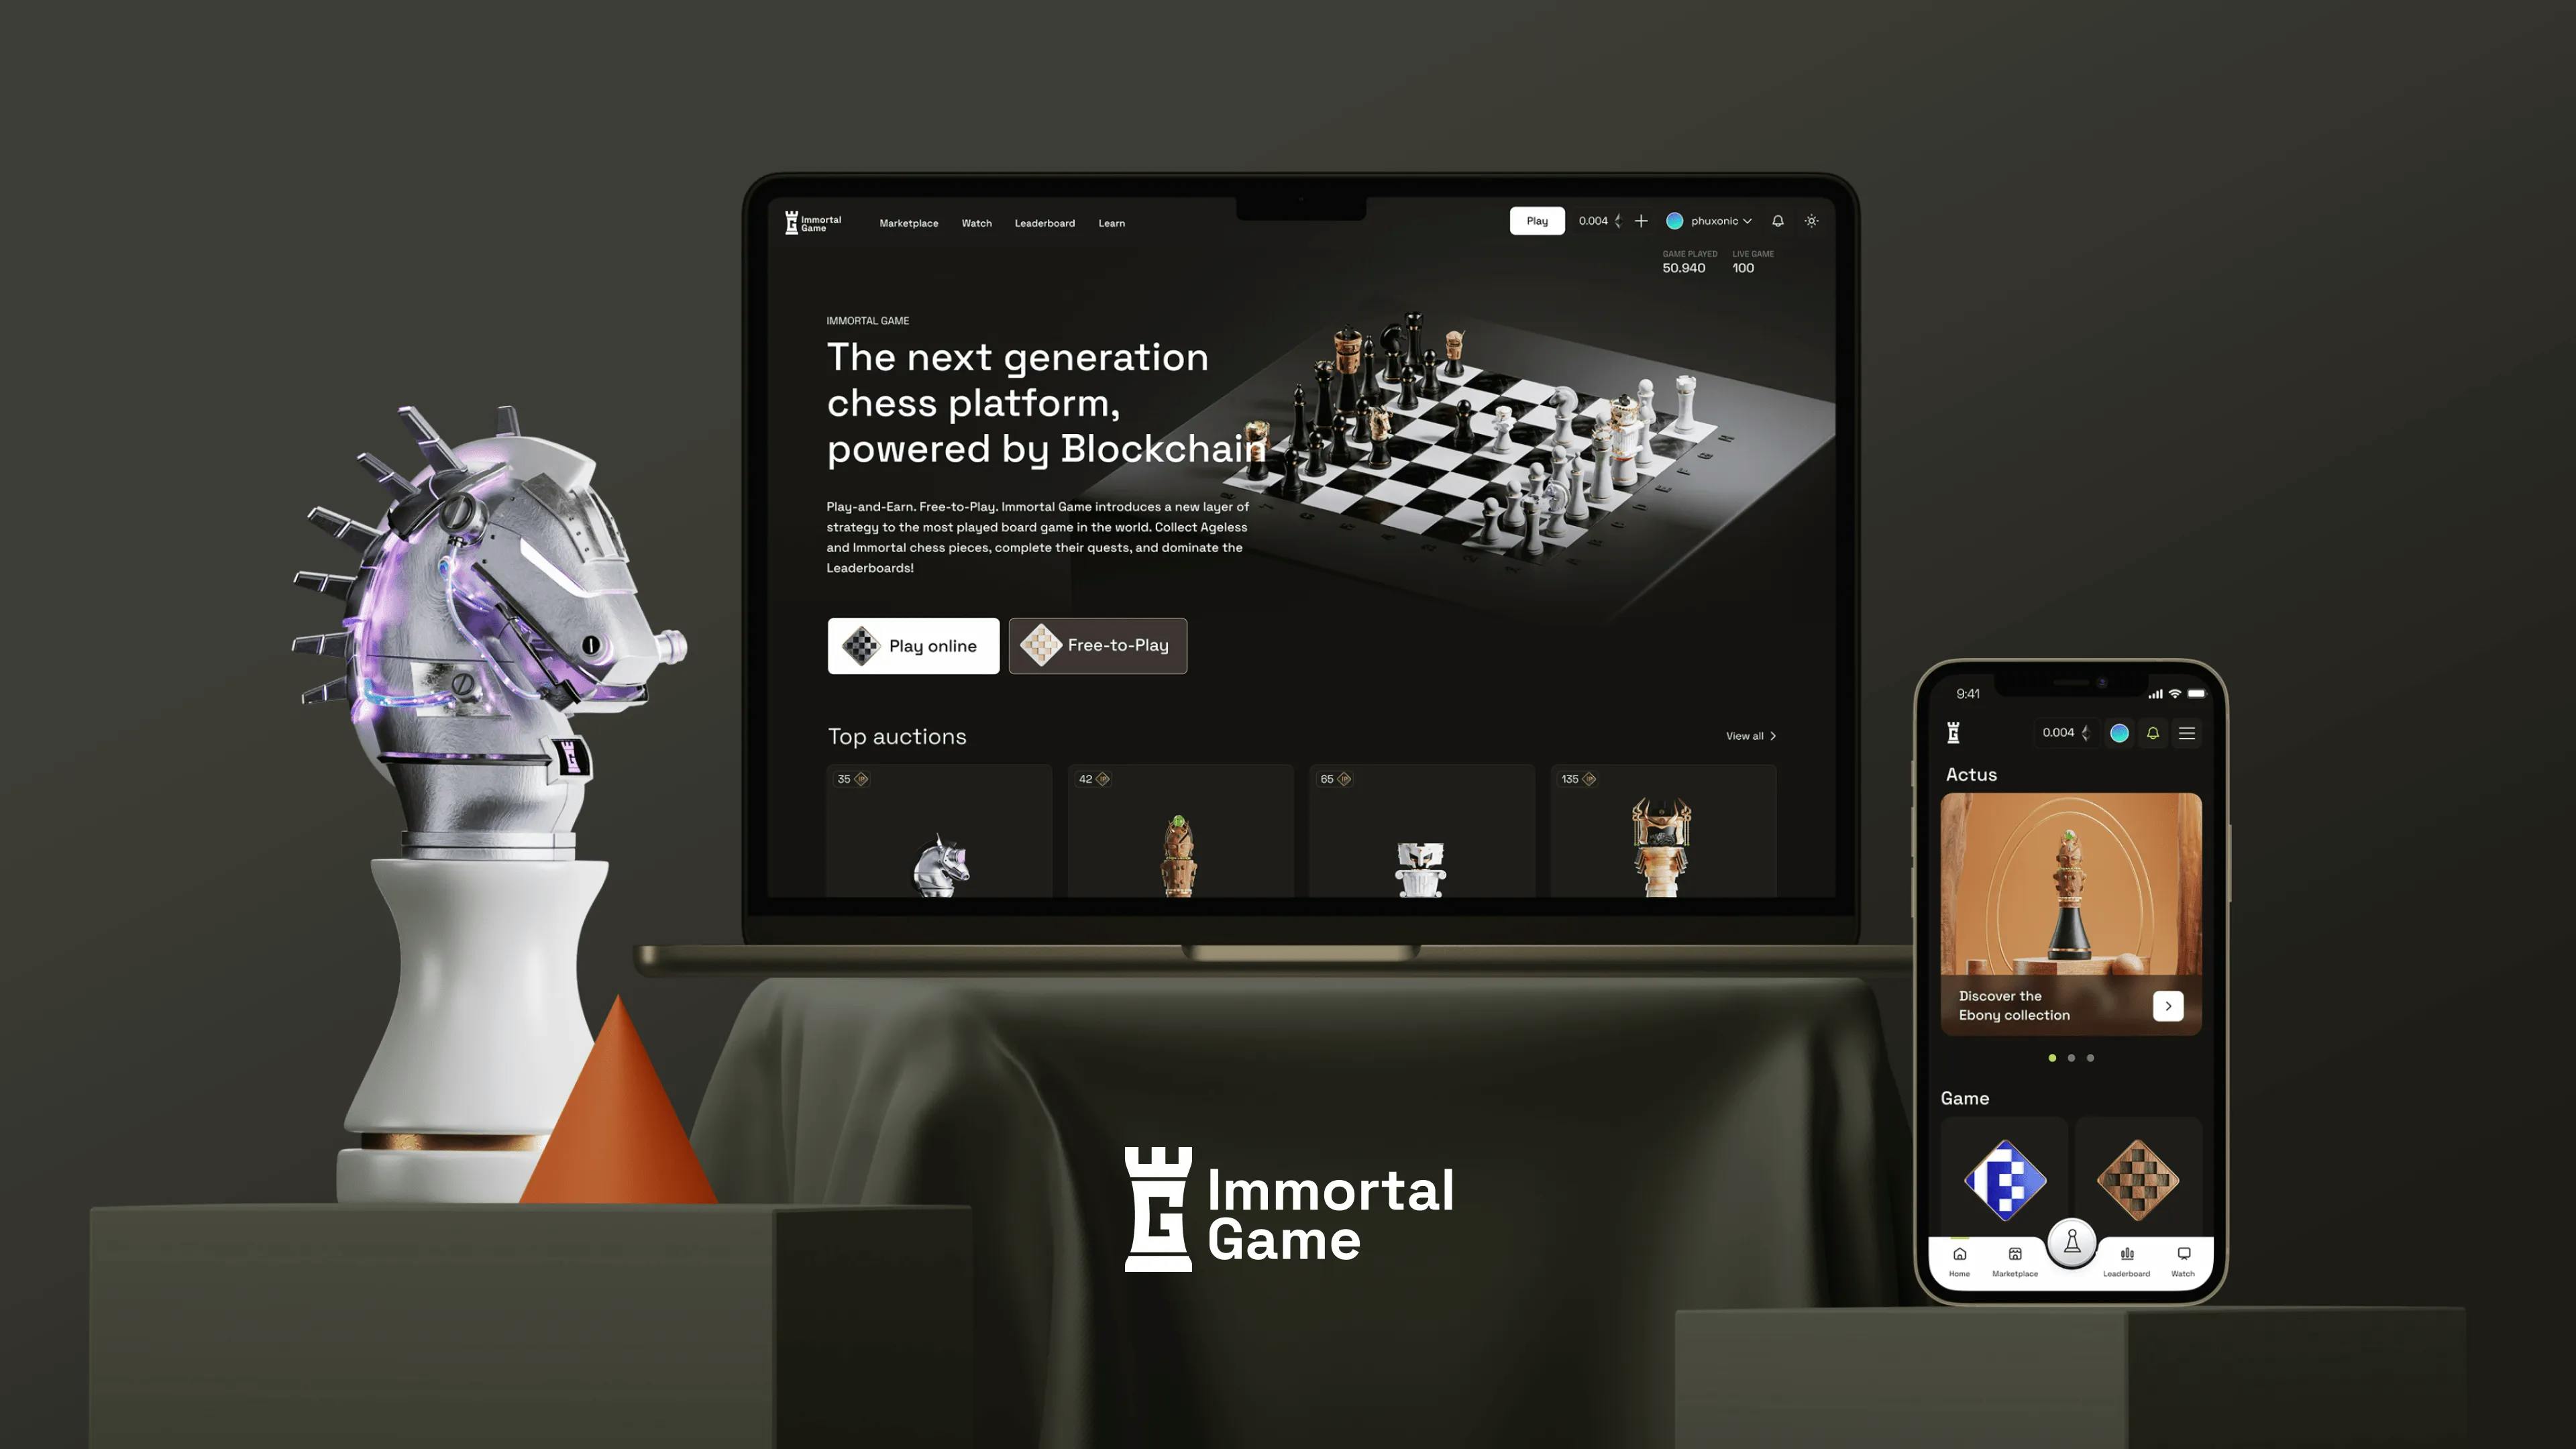 Immortal Game () - All information about Immortal Game ICO (Token